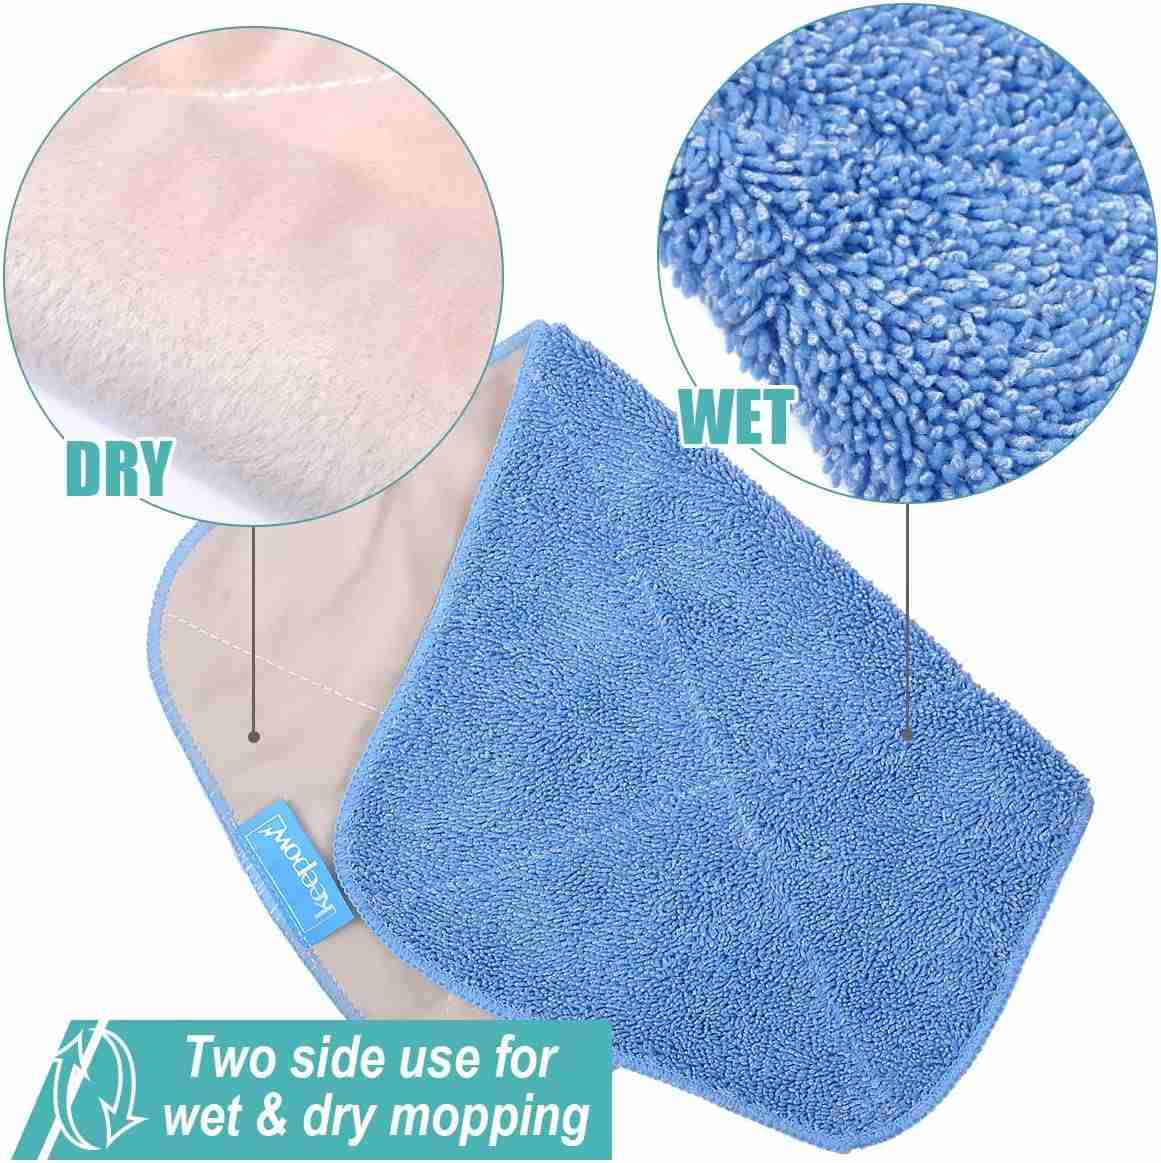 KEEPOW Mop Cloth Refills for Professional Microfiber Mop, Double Side use, Wet & Dry Mopping, 5-Pack